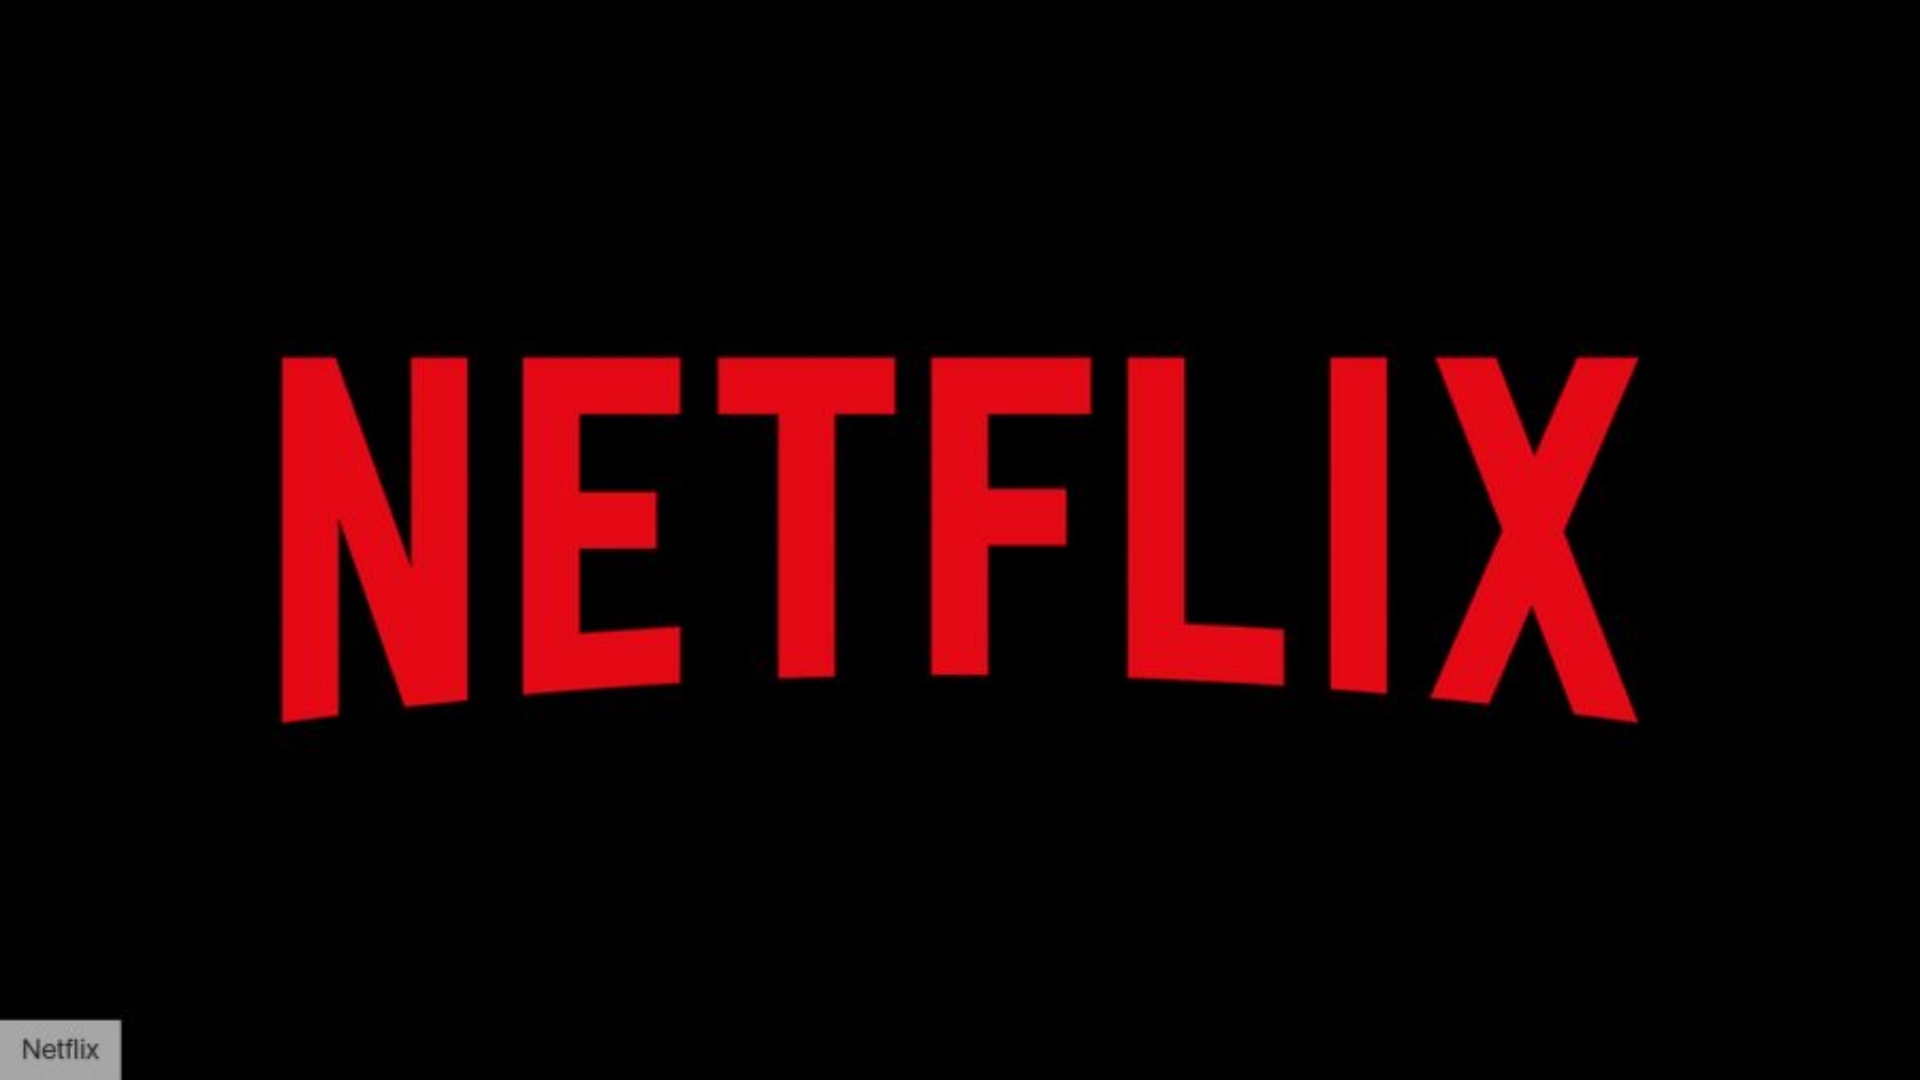 Best streaming service, Netflix - its logo is red on black.